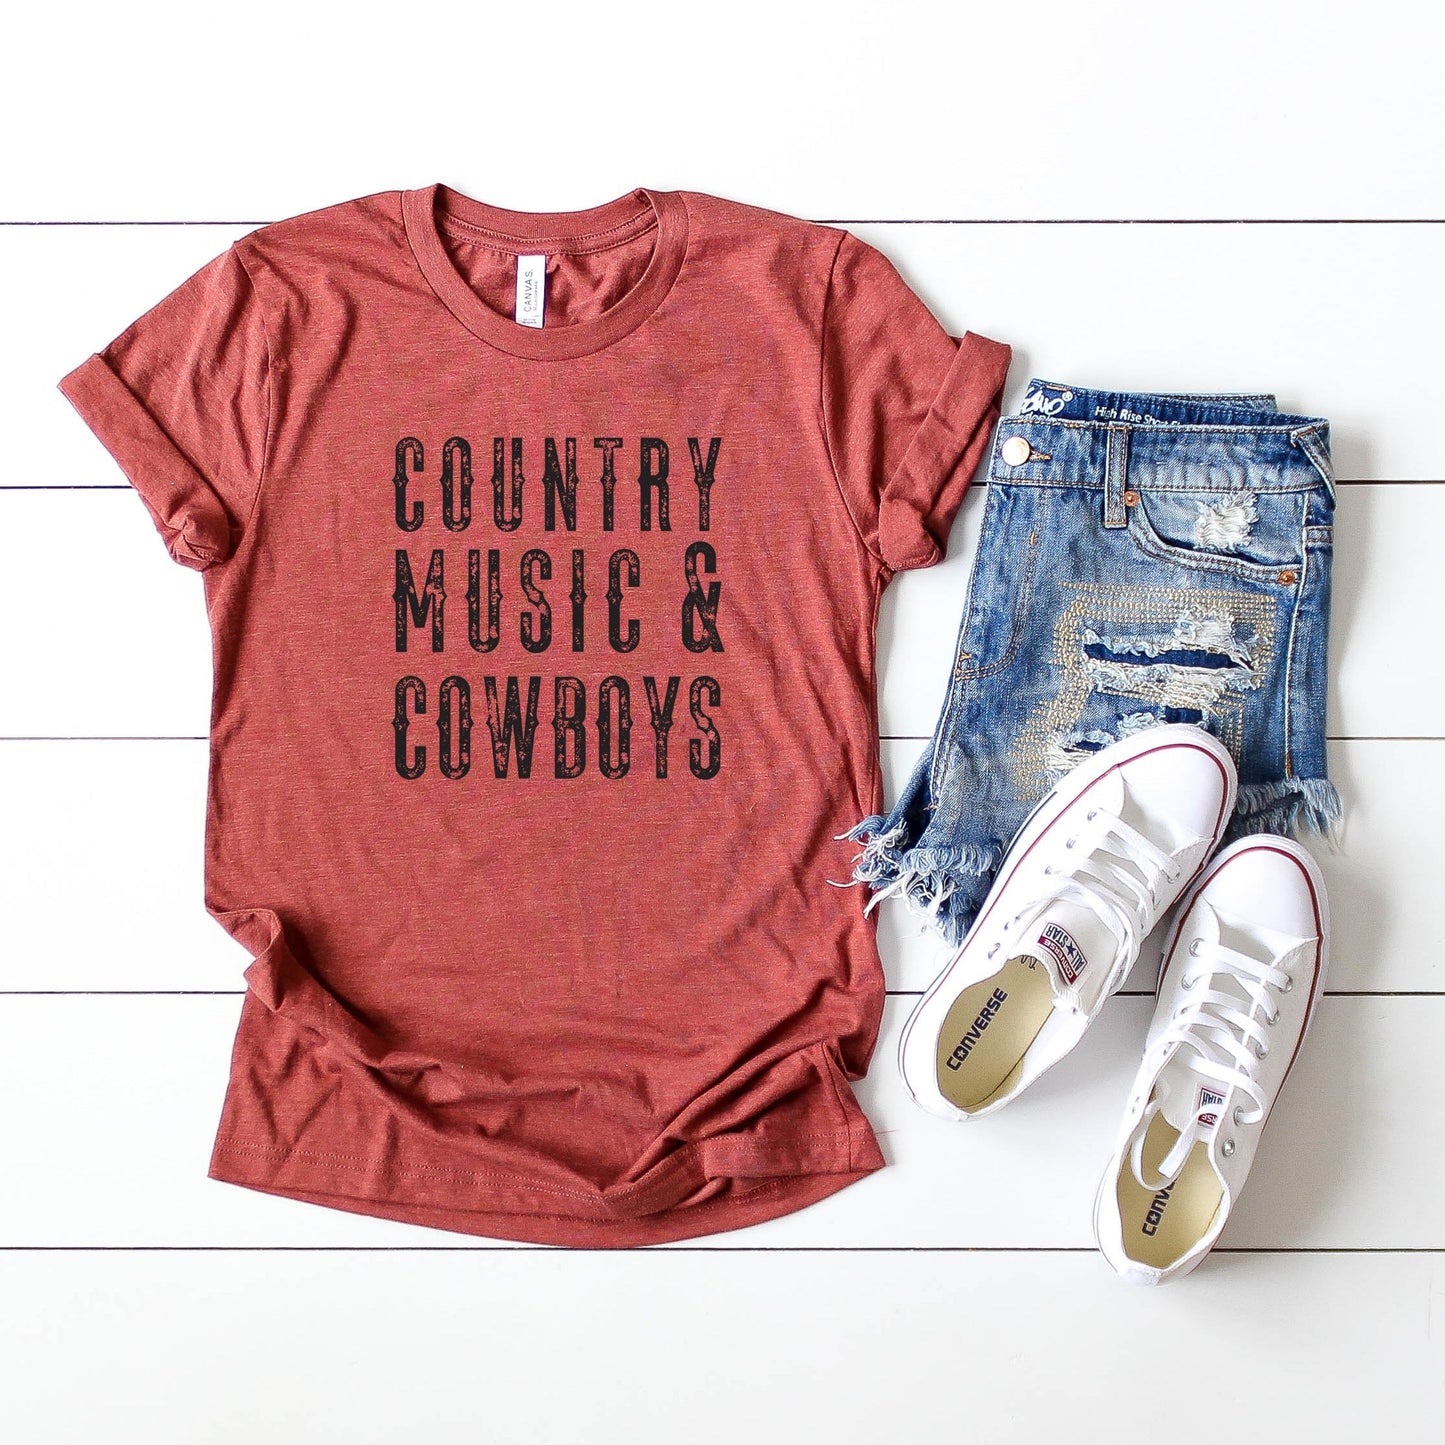 Country Music and Cowboys | Short Sleeve Crew Neck